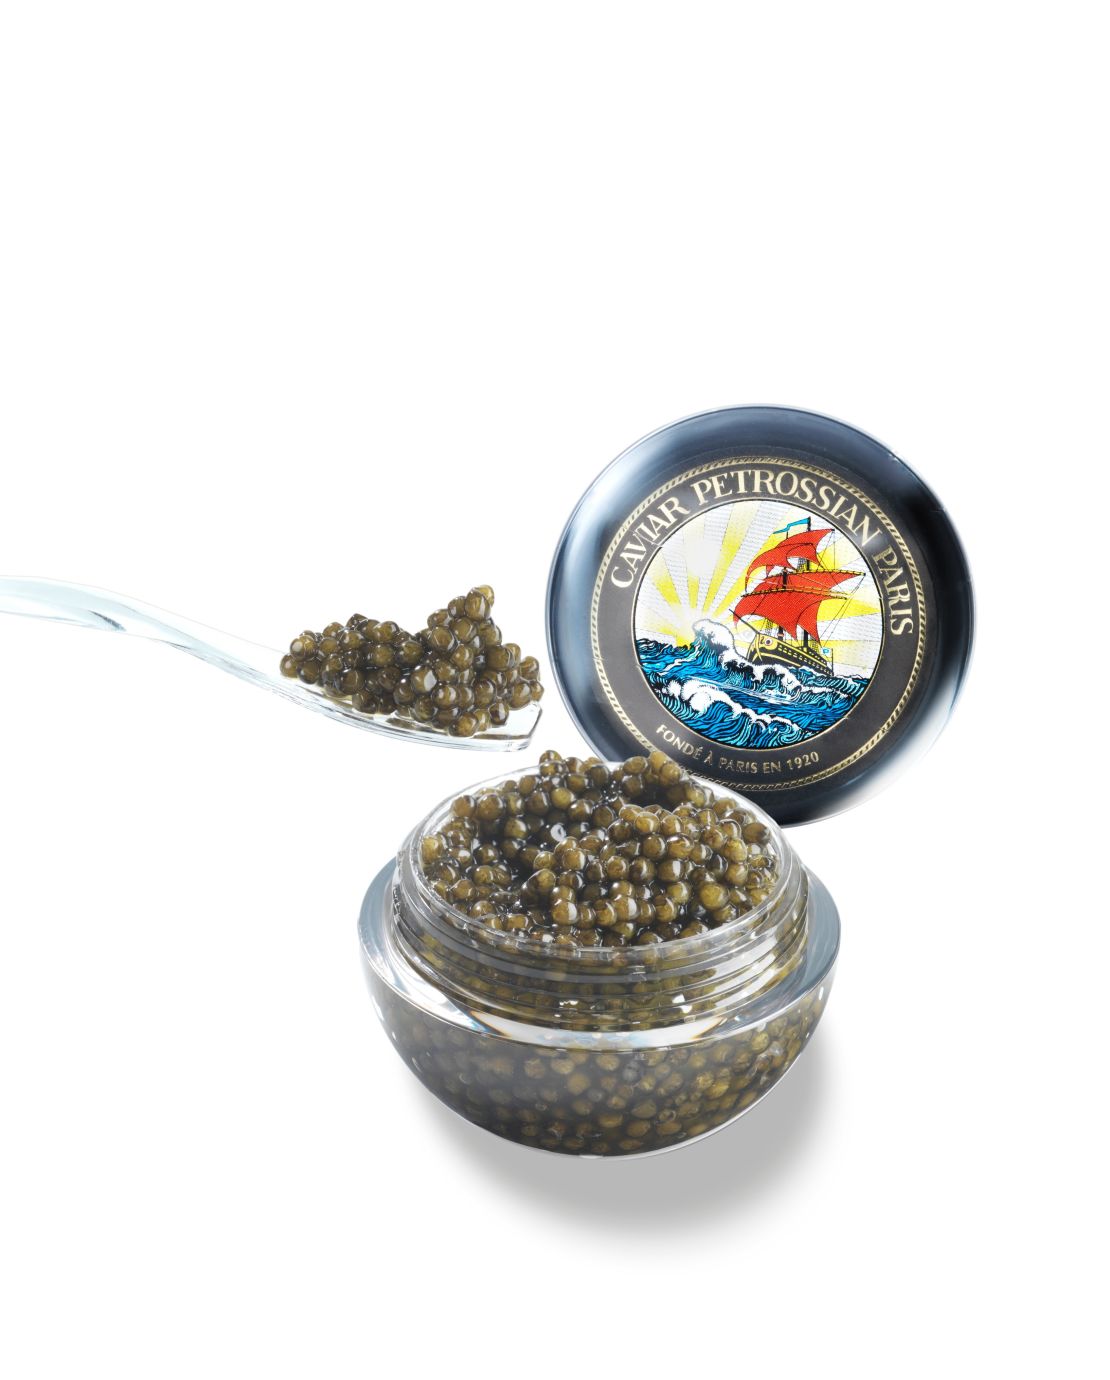 Top grade caviar is usually lighter in color. 